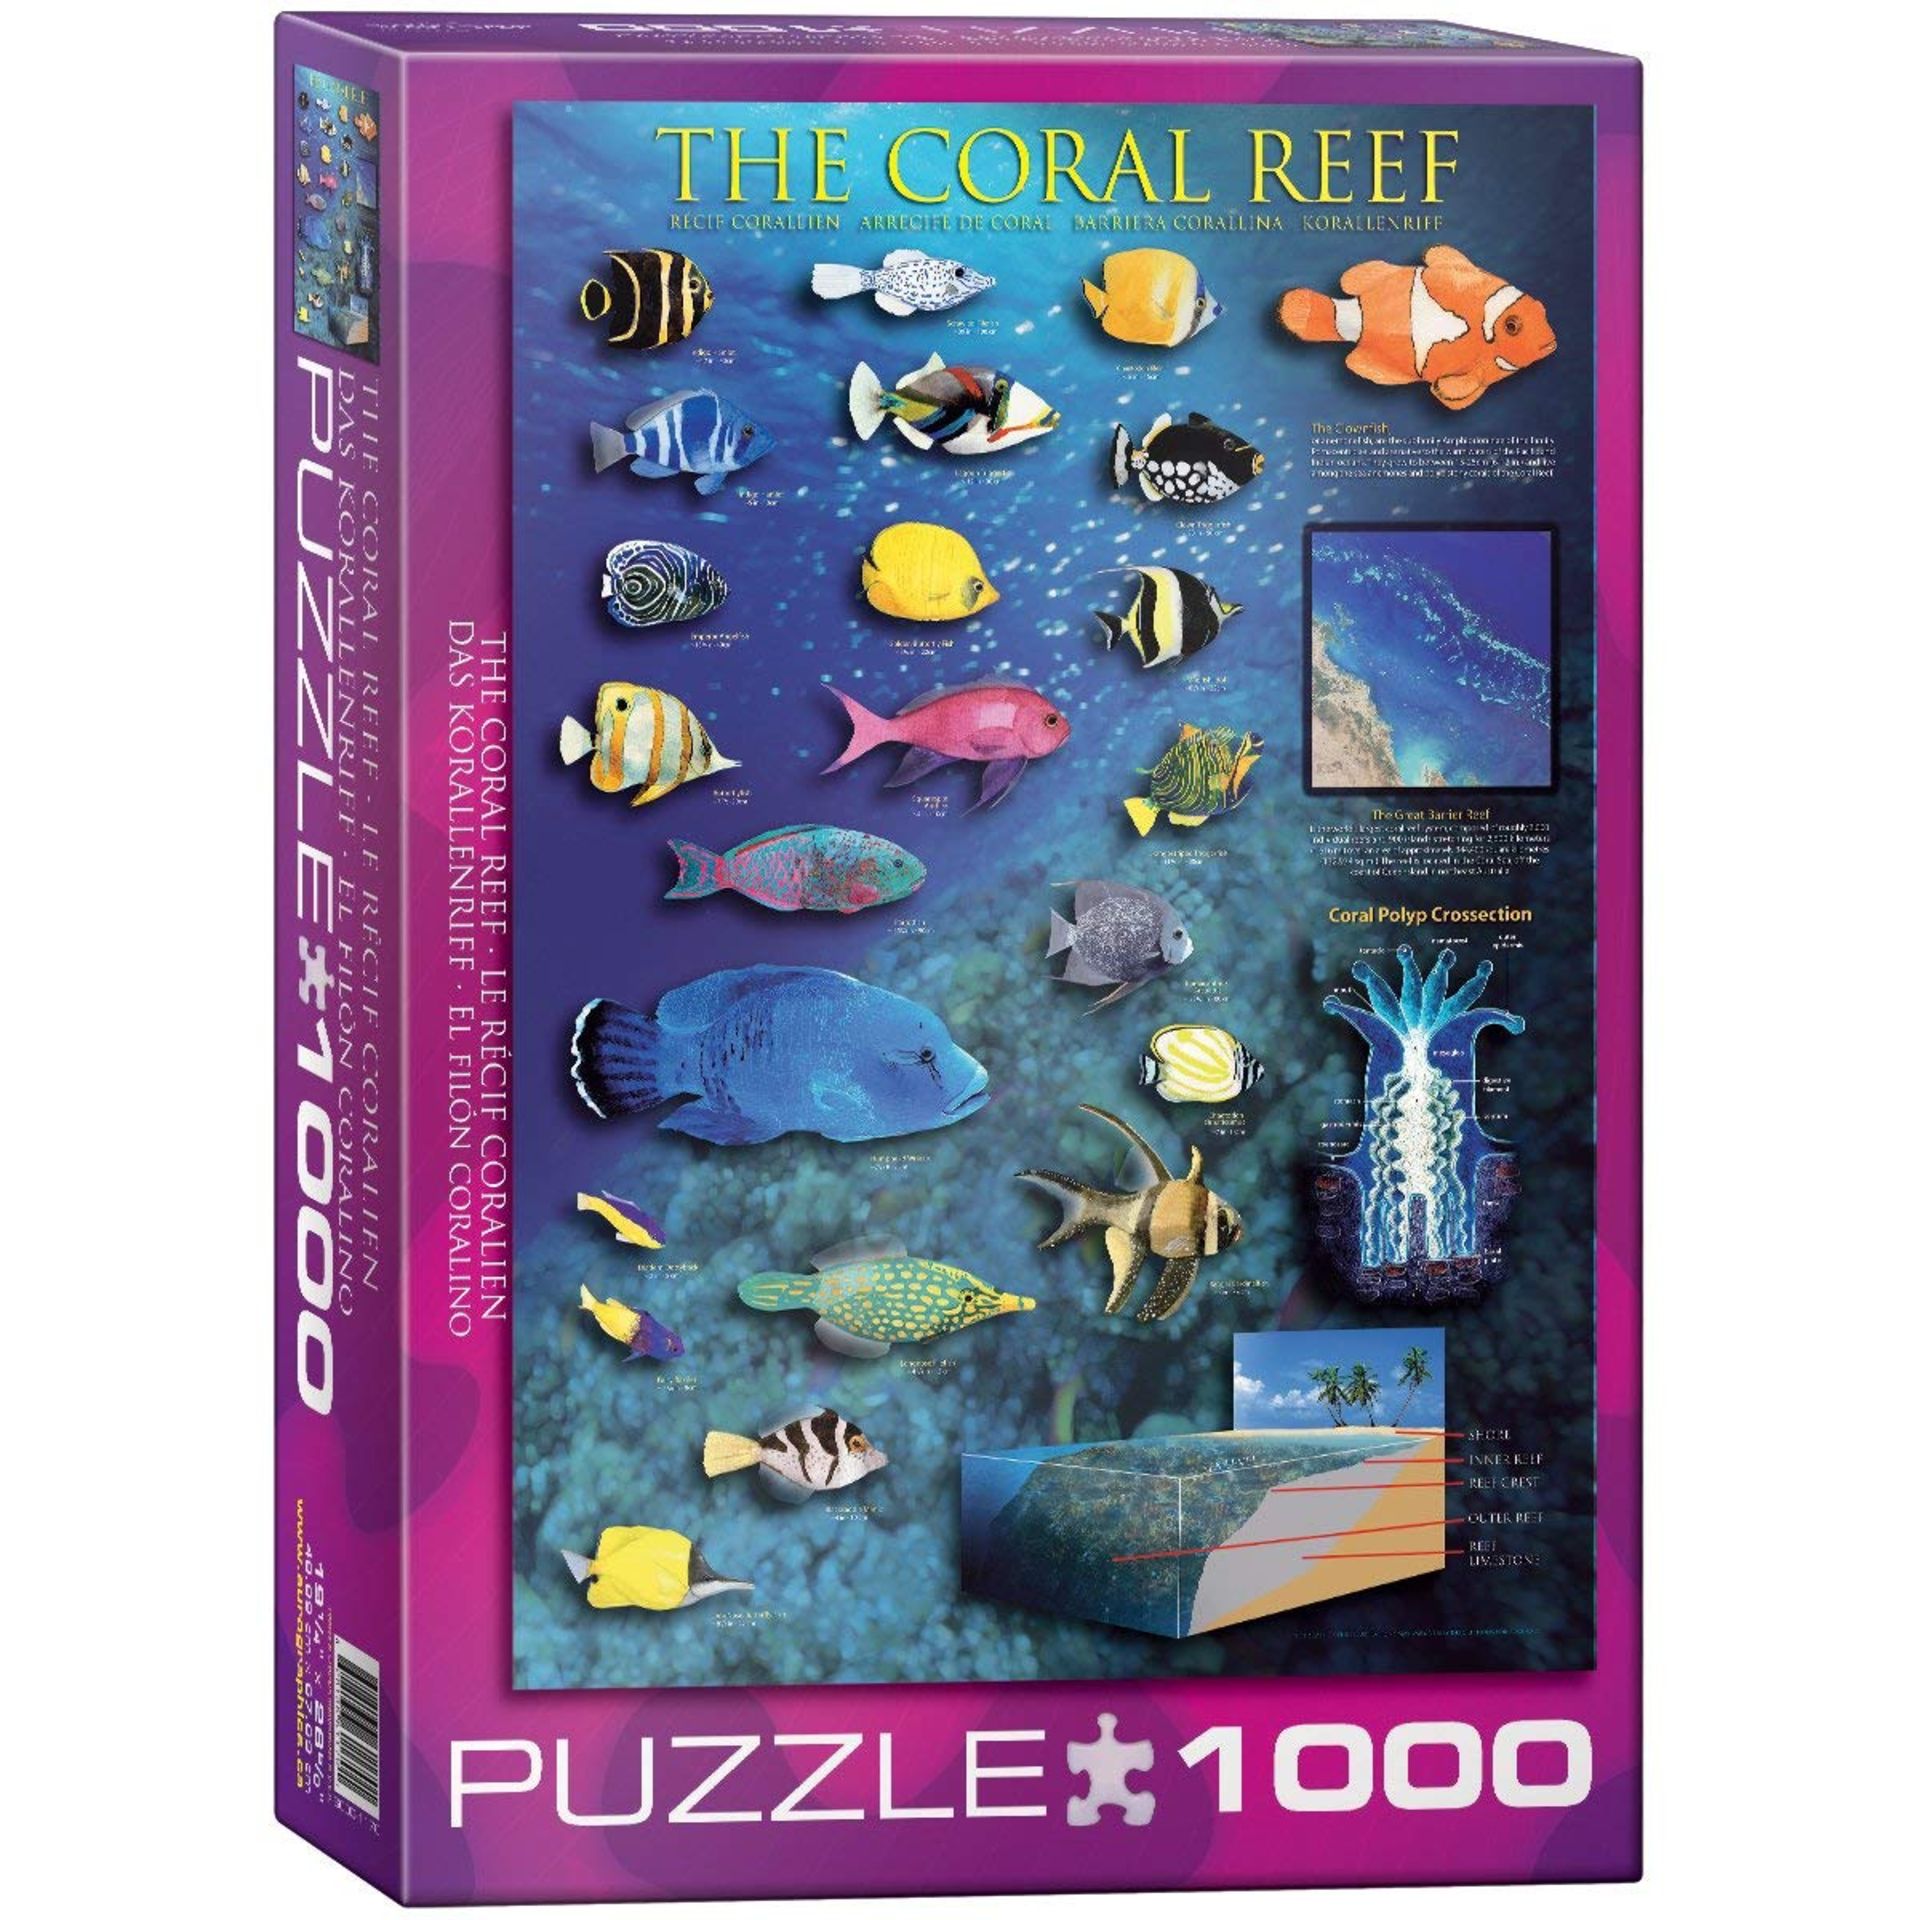 23 x Eurographics The Coral Reef Puzzle (1000 Pieces) | 628136611701 | RRP £137.77